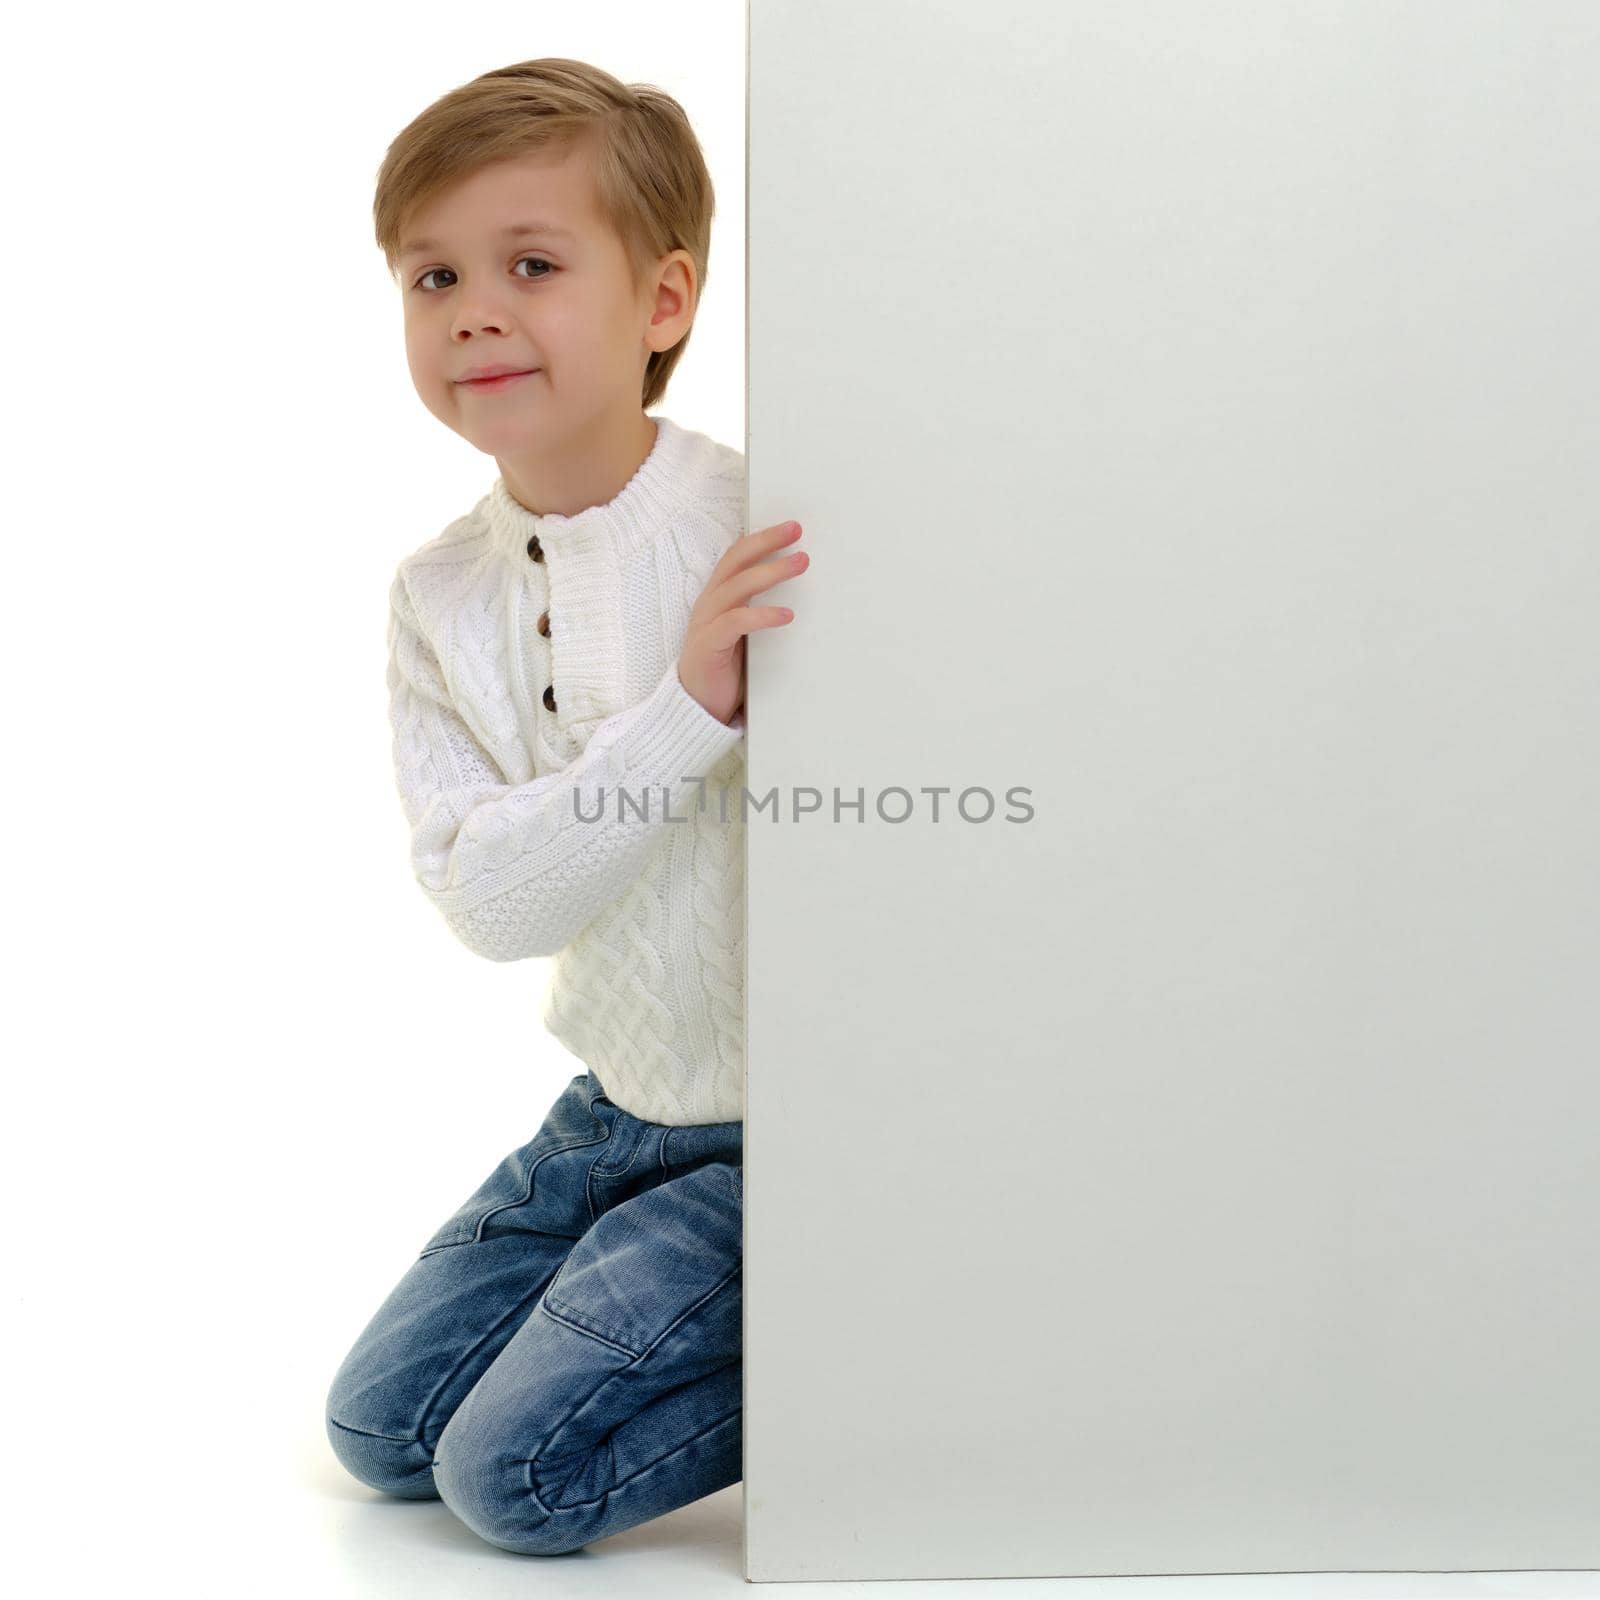 A little boy looks through an empty banner on which you can write any text. The concept of a happy childhood and advertising of children's goods. Isolated on white background.